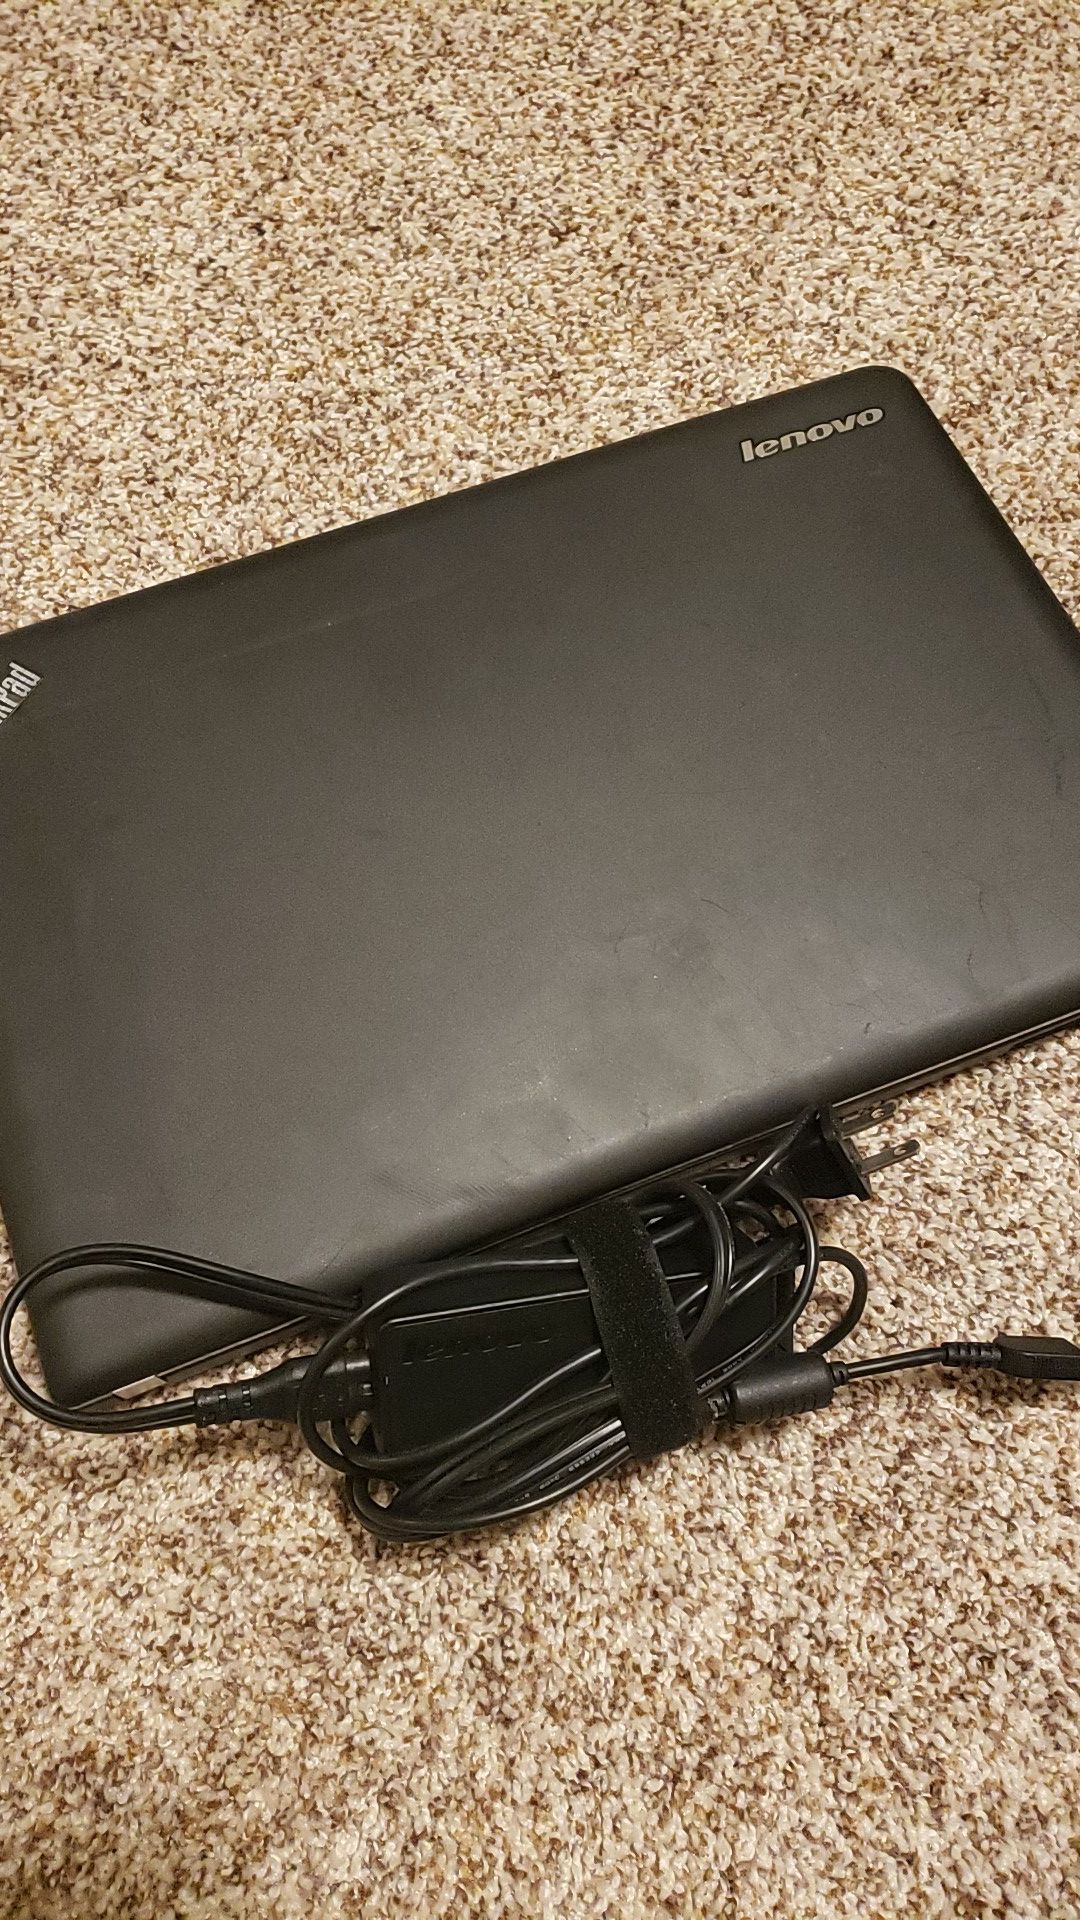 Lenovo Thinkpad E540 - 2013 laptop. Windows 7. Comes with charger